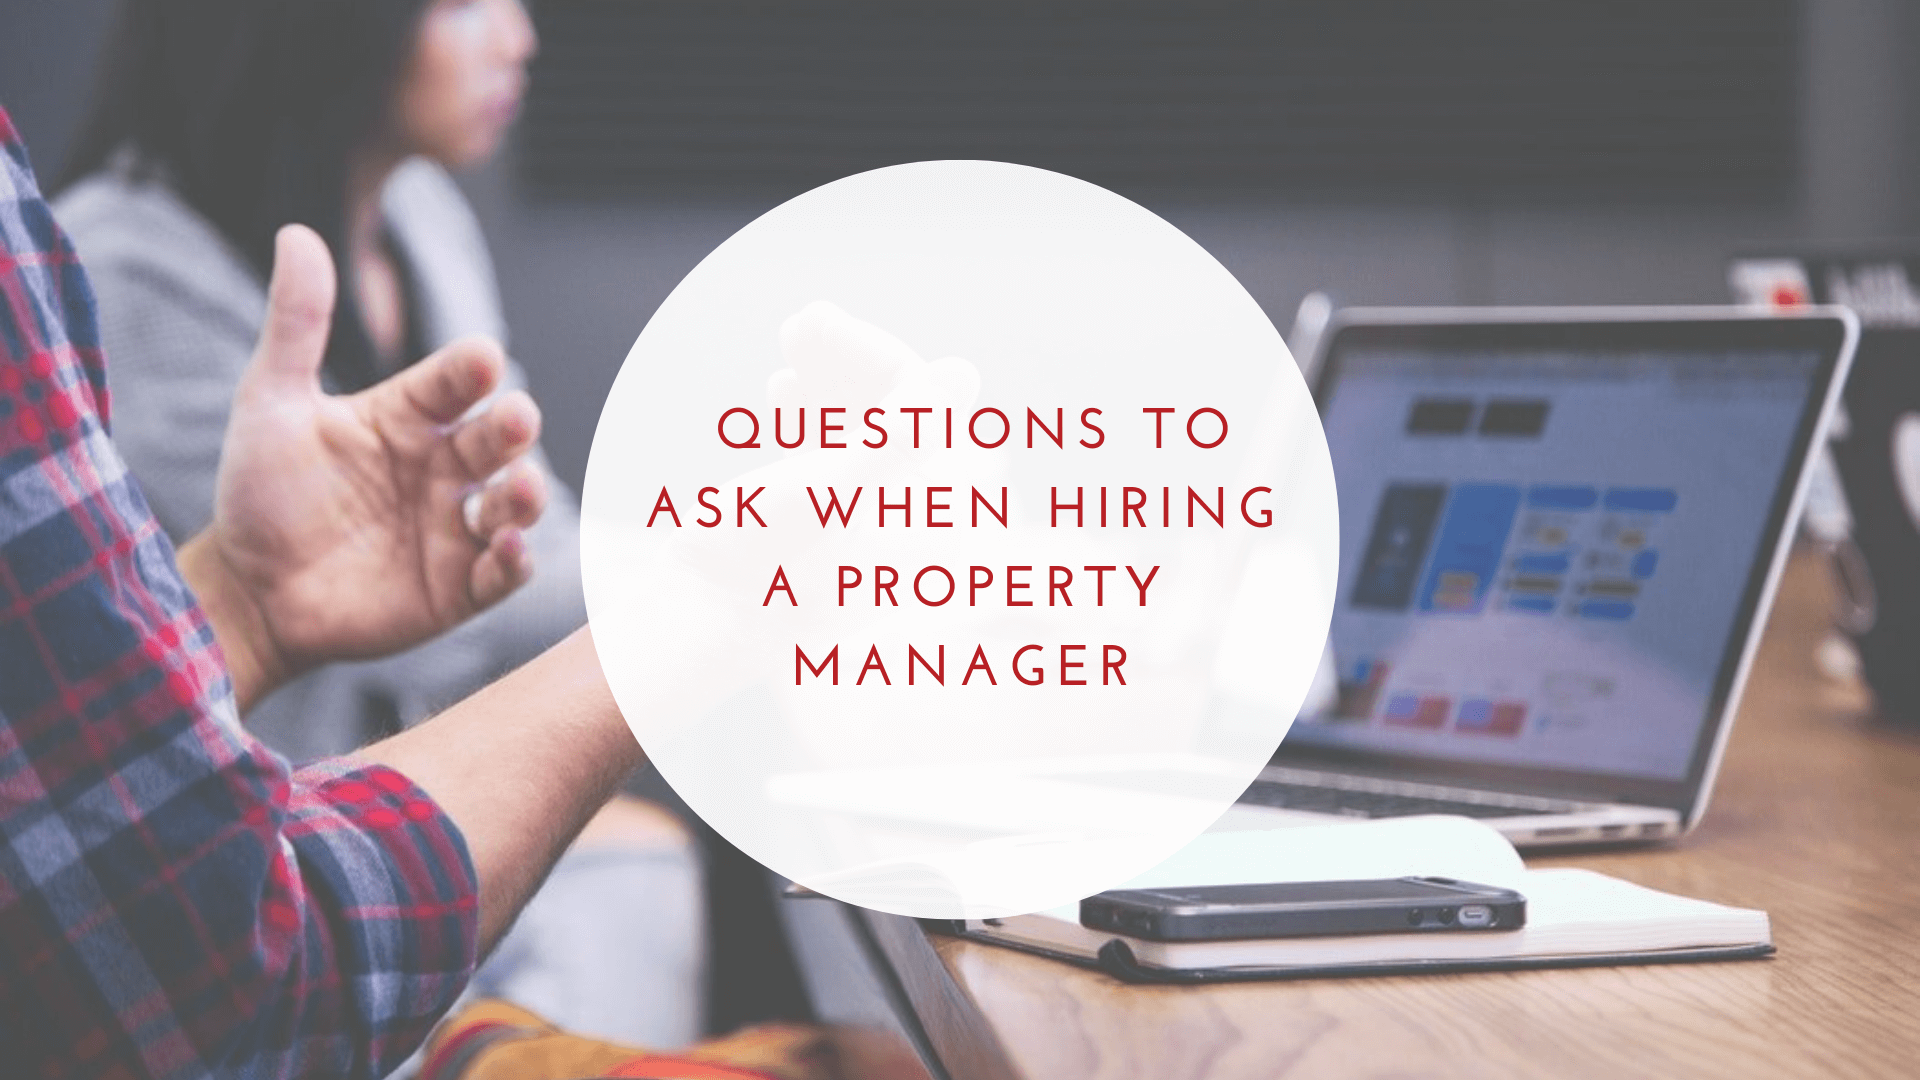 Questions to Ask When Hiring a Property Manager - article banner